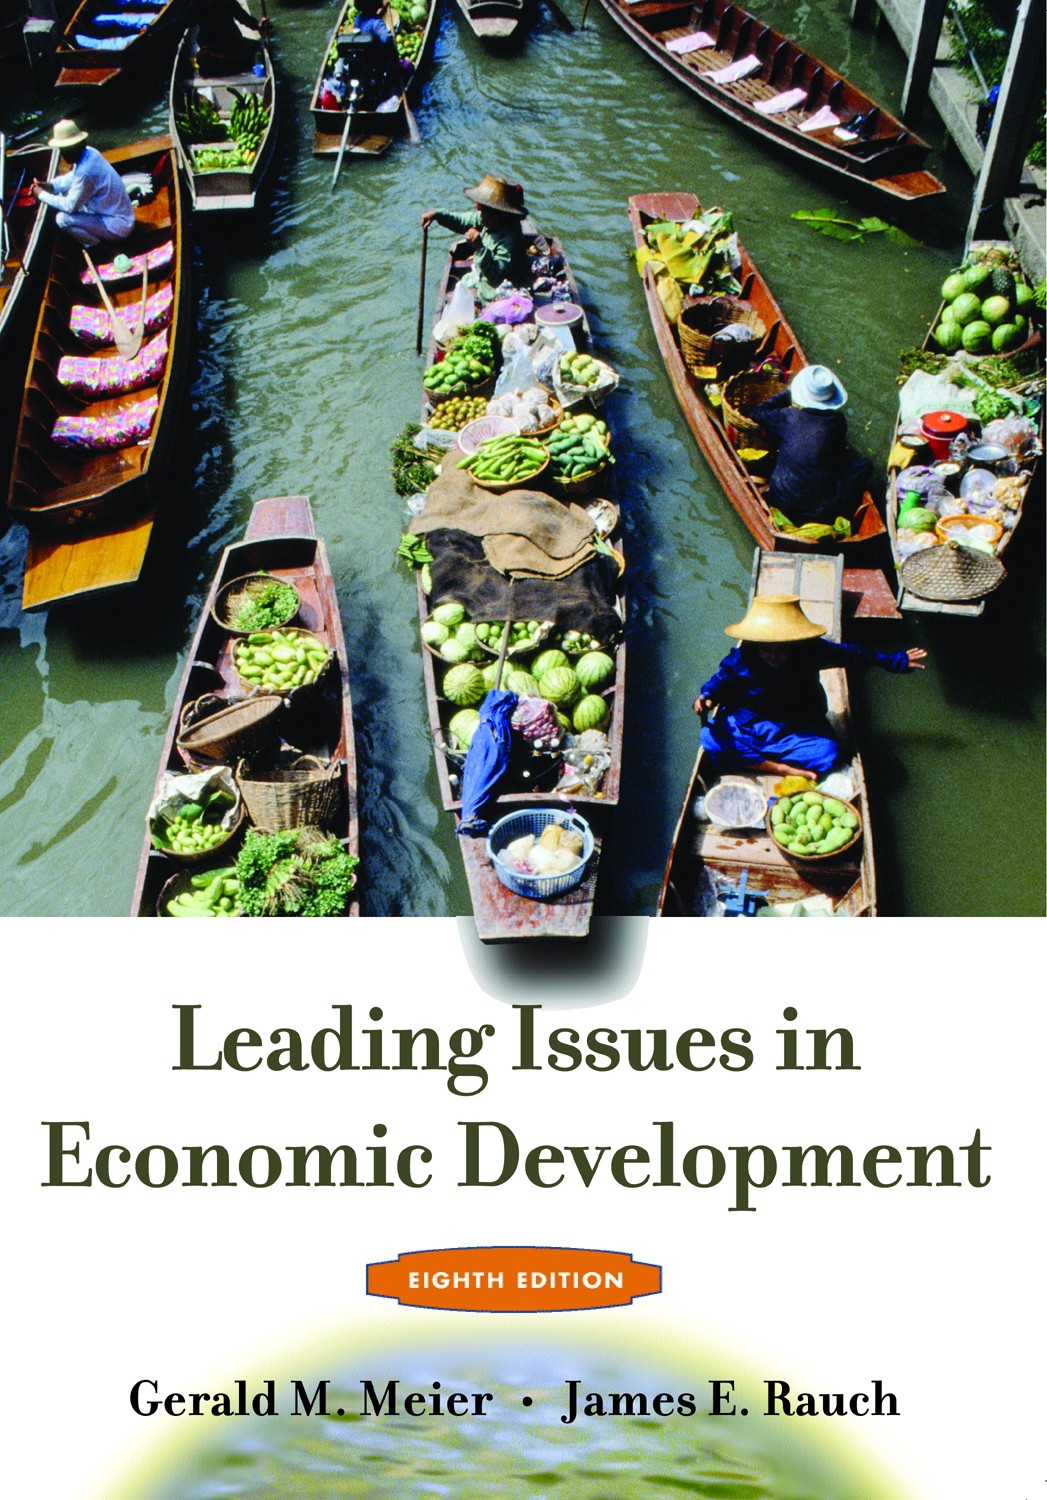 Leading Issues in Economic Development, 8th ed., by Gerald M. Meier and James E. Rauch